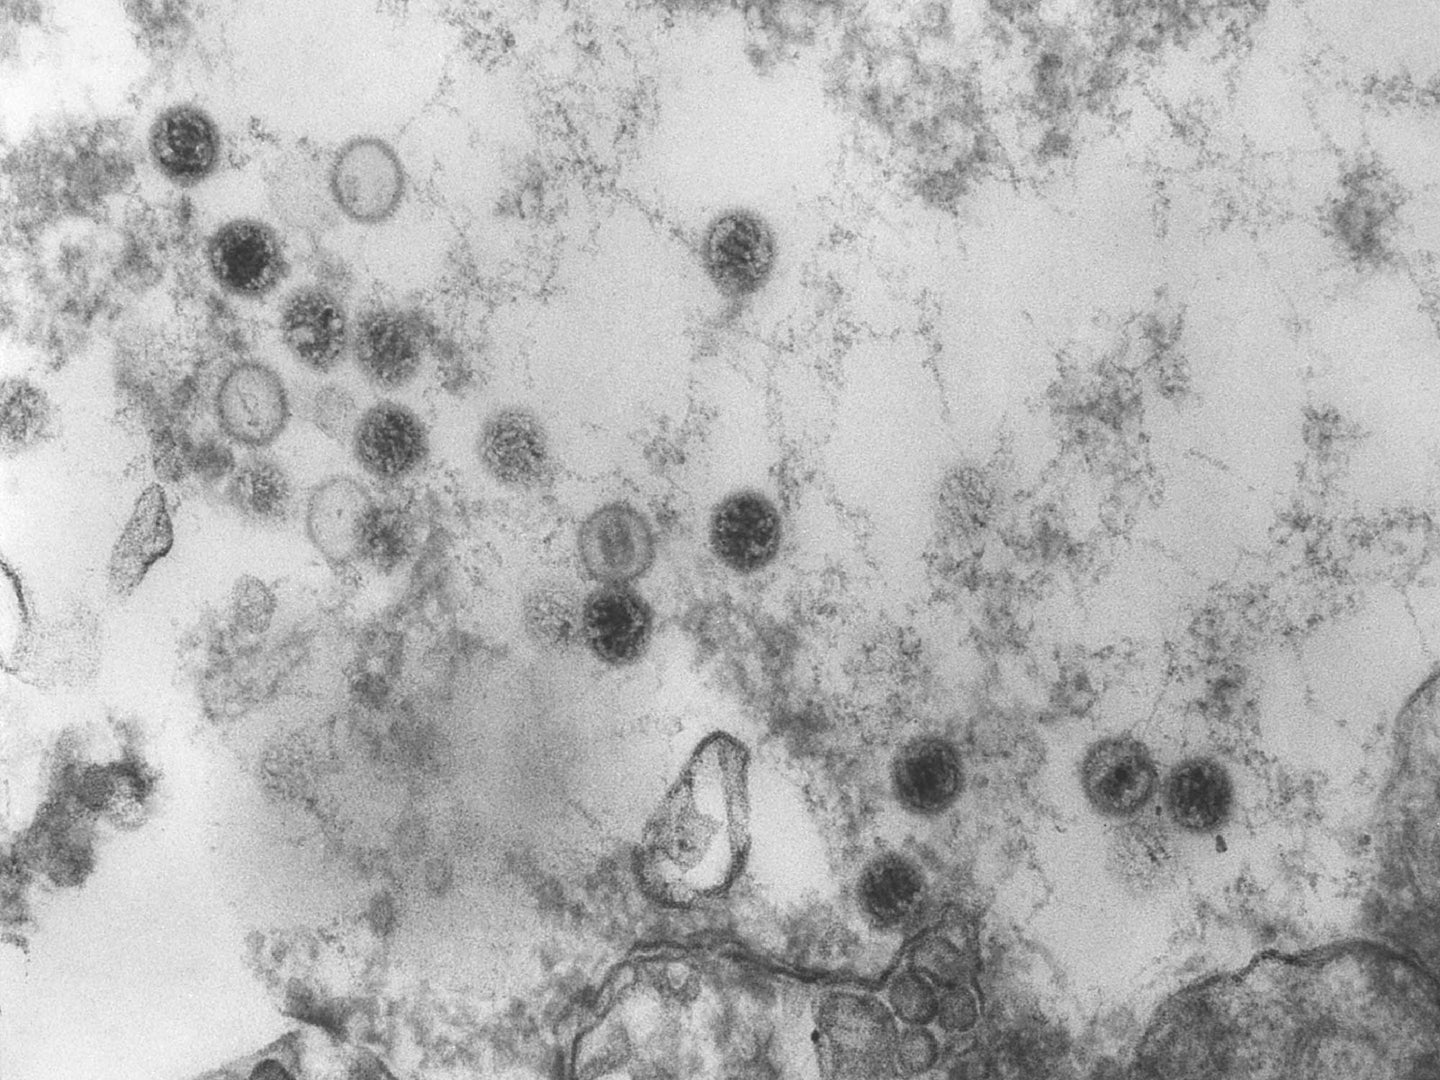 An 1975 electron microscope image reveals several spherical Epstein-Barr virus particles.